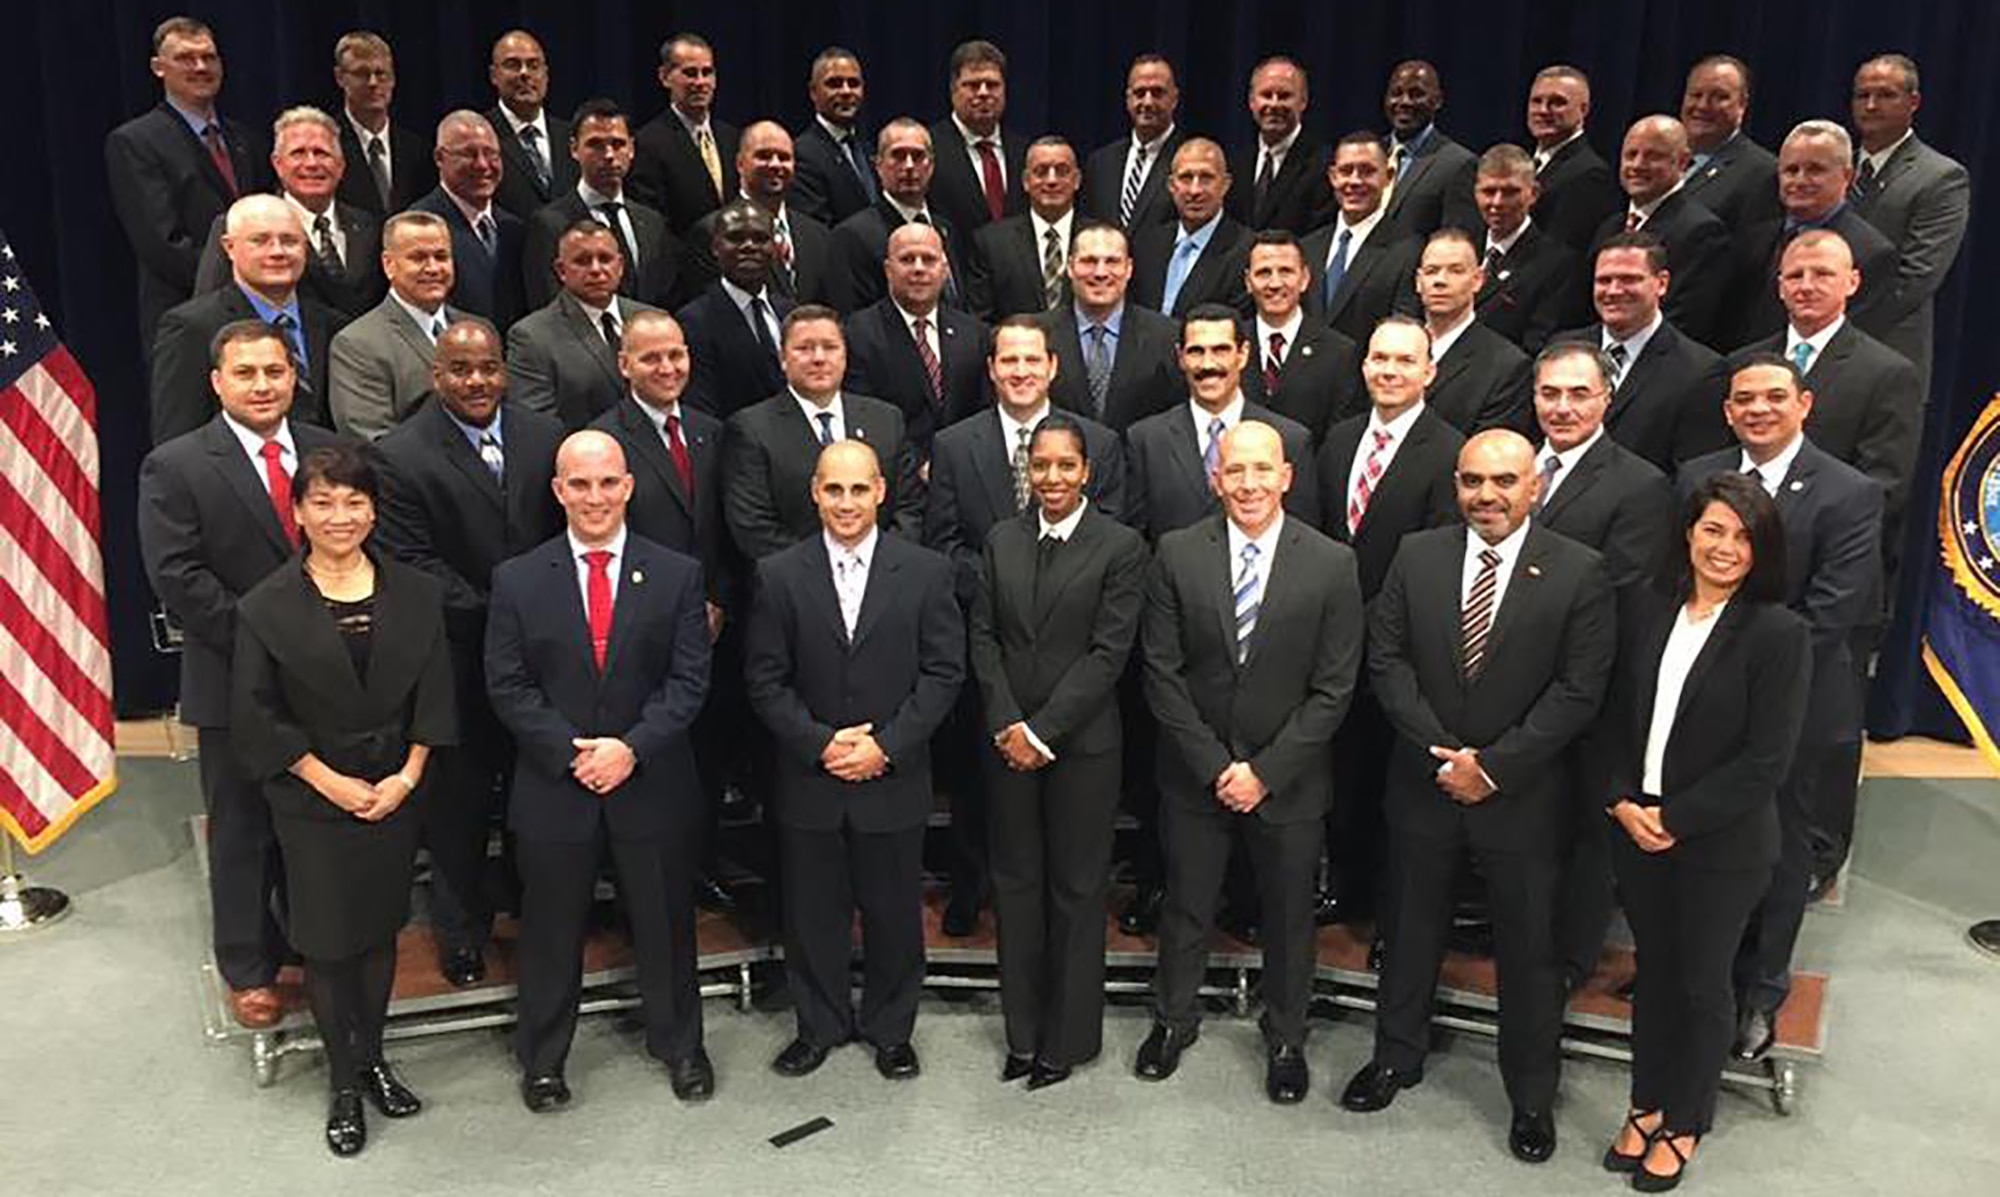 Assistant Special Agent in Charge Paul Sternal from the Defense Criminal Investigative Service was one of 222 law enforcement professionals to graduate from the FBI's National Academy Program on Dec. 16. The graduation ceremony was held in Quantico, Virginia. He is shown above, second row from the
bottom, third from the right, with his cohort of 49 people.
